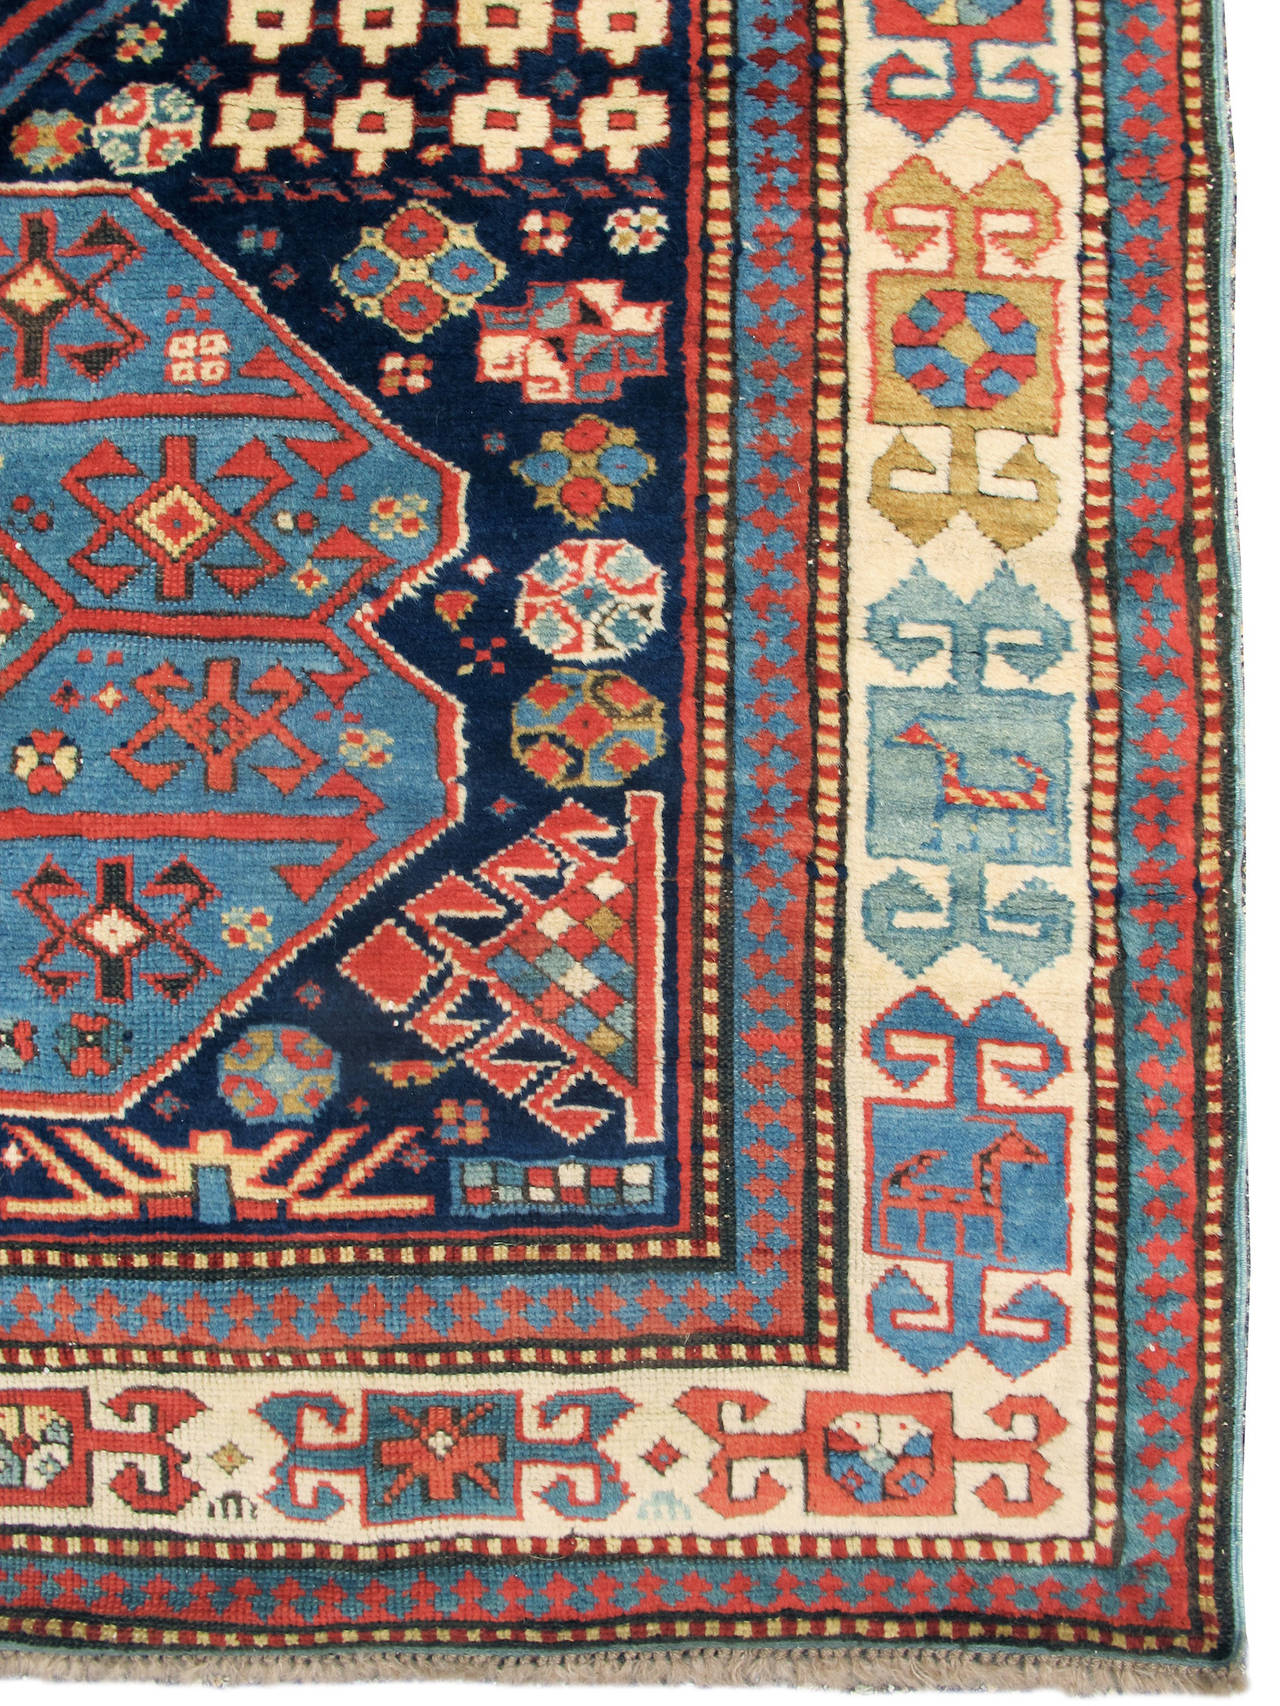 Over the years Peter Pap Oriental rugs has handled some truly exceptional Akstafa pieces from the Caucasus. We are very pleased to be offering this premiere example of the genre. Against a deep indigo ground a column of irregular medallions is drawn